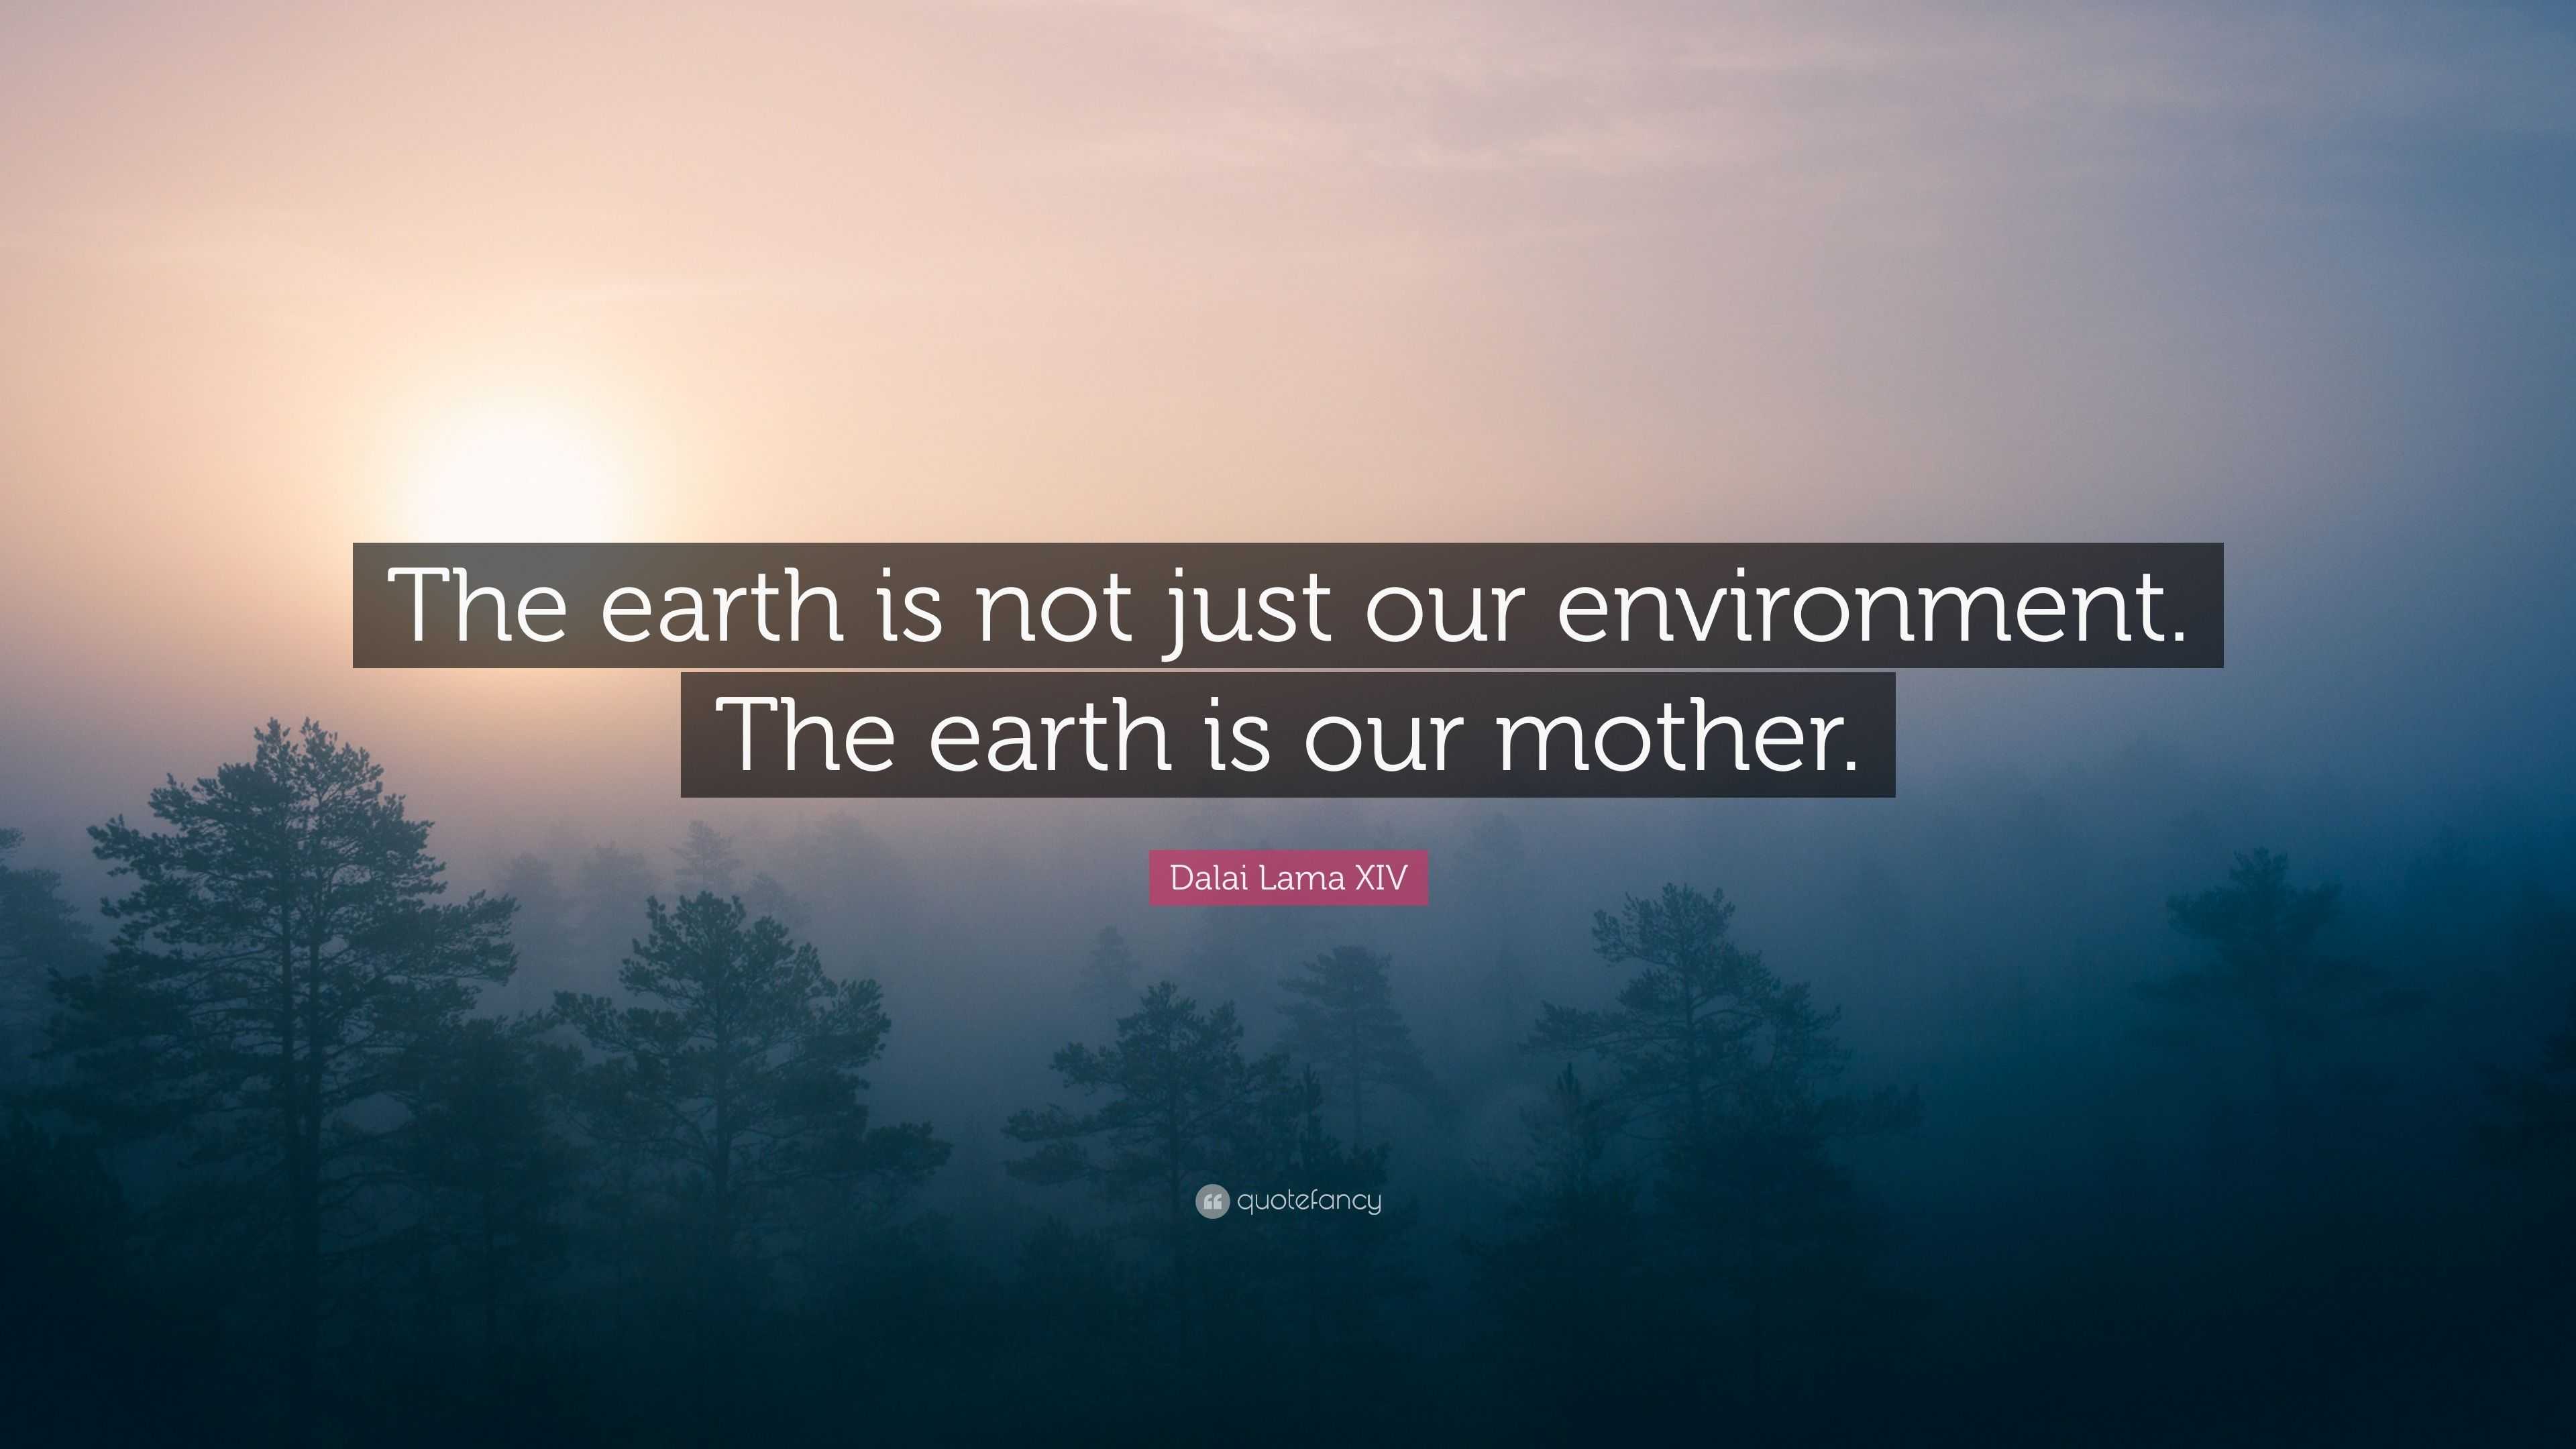 Dalai Lama XIV Quote: “The earth is not just our environment. The earth